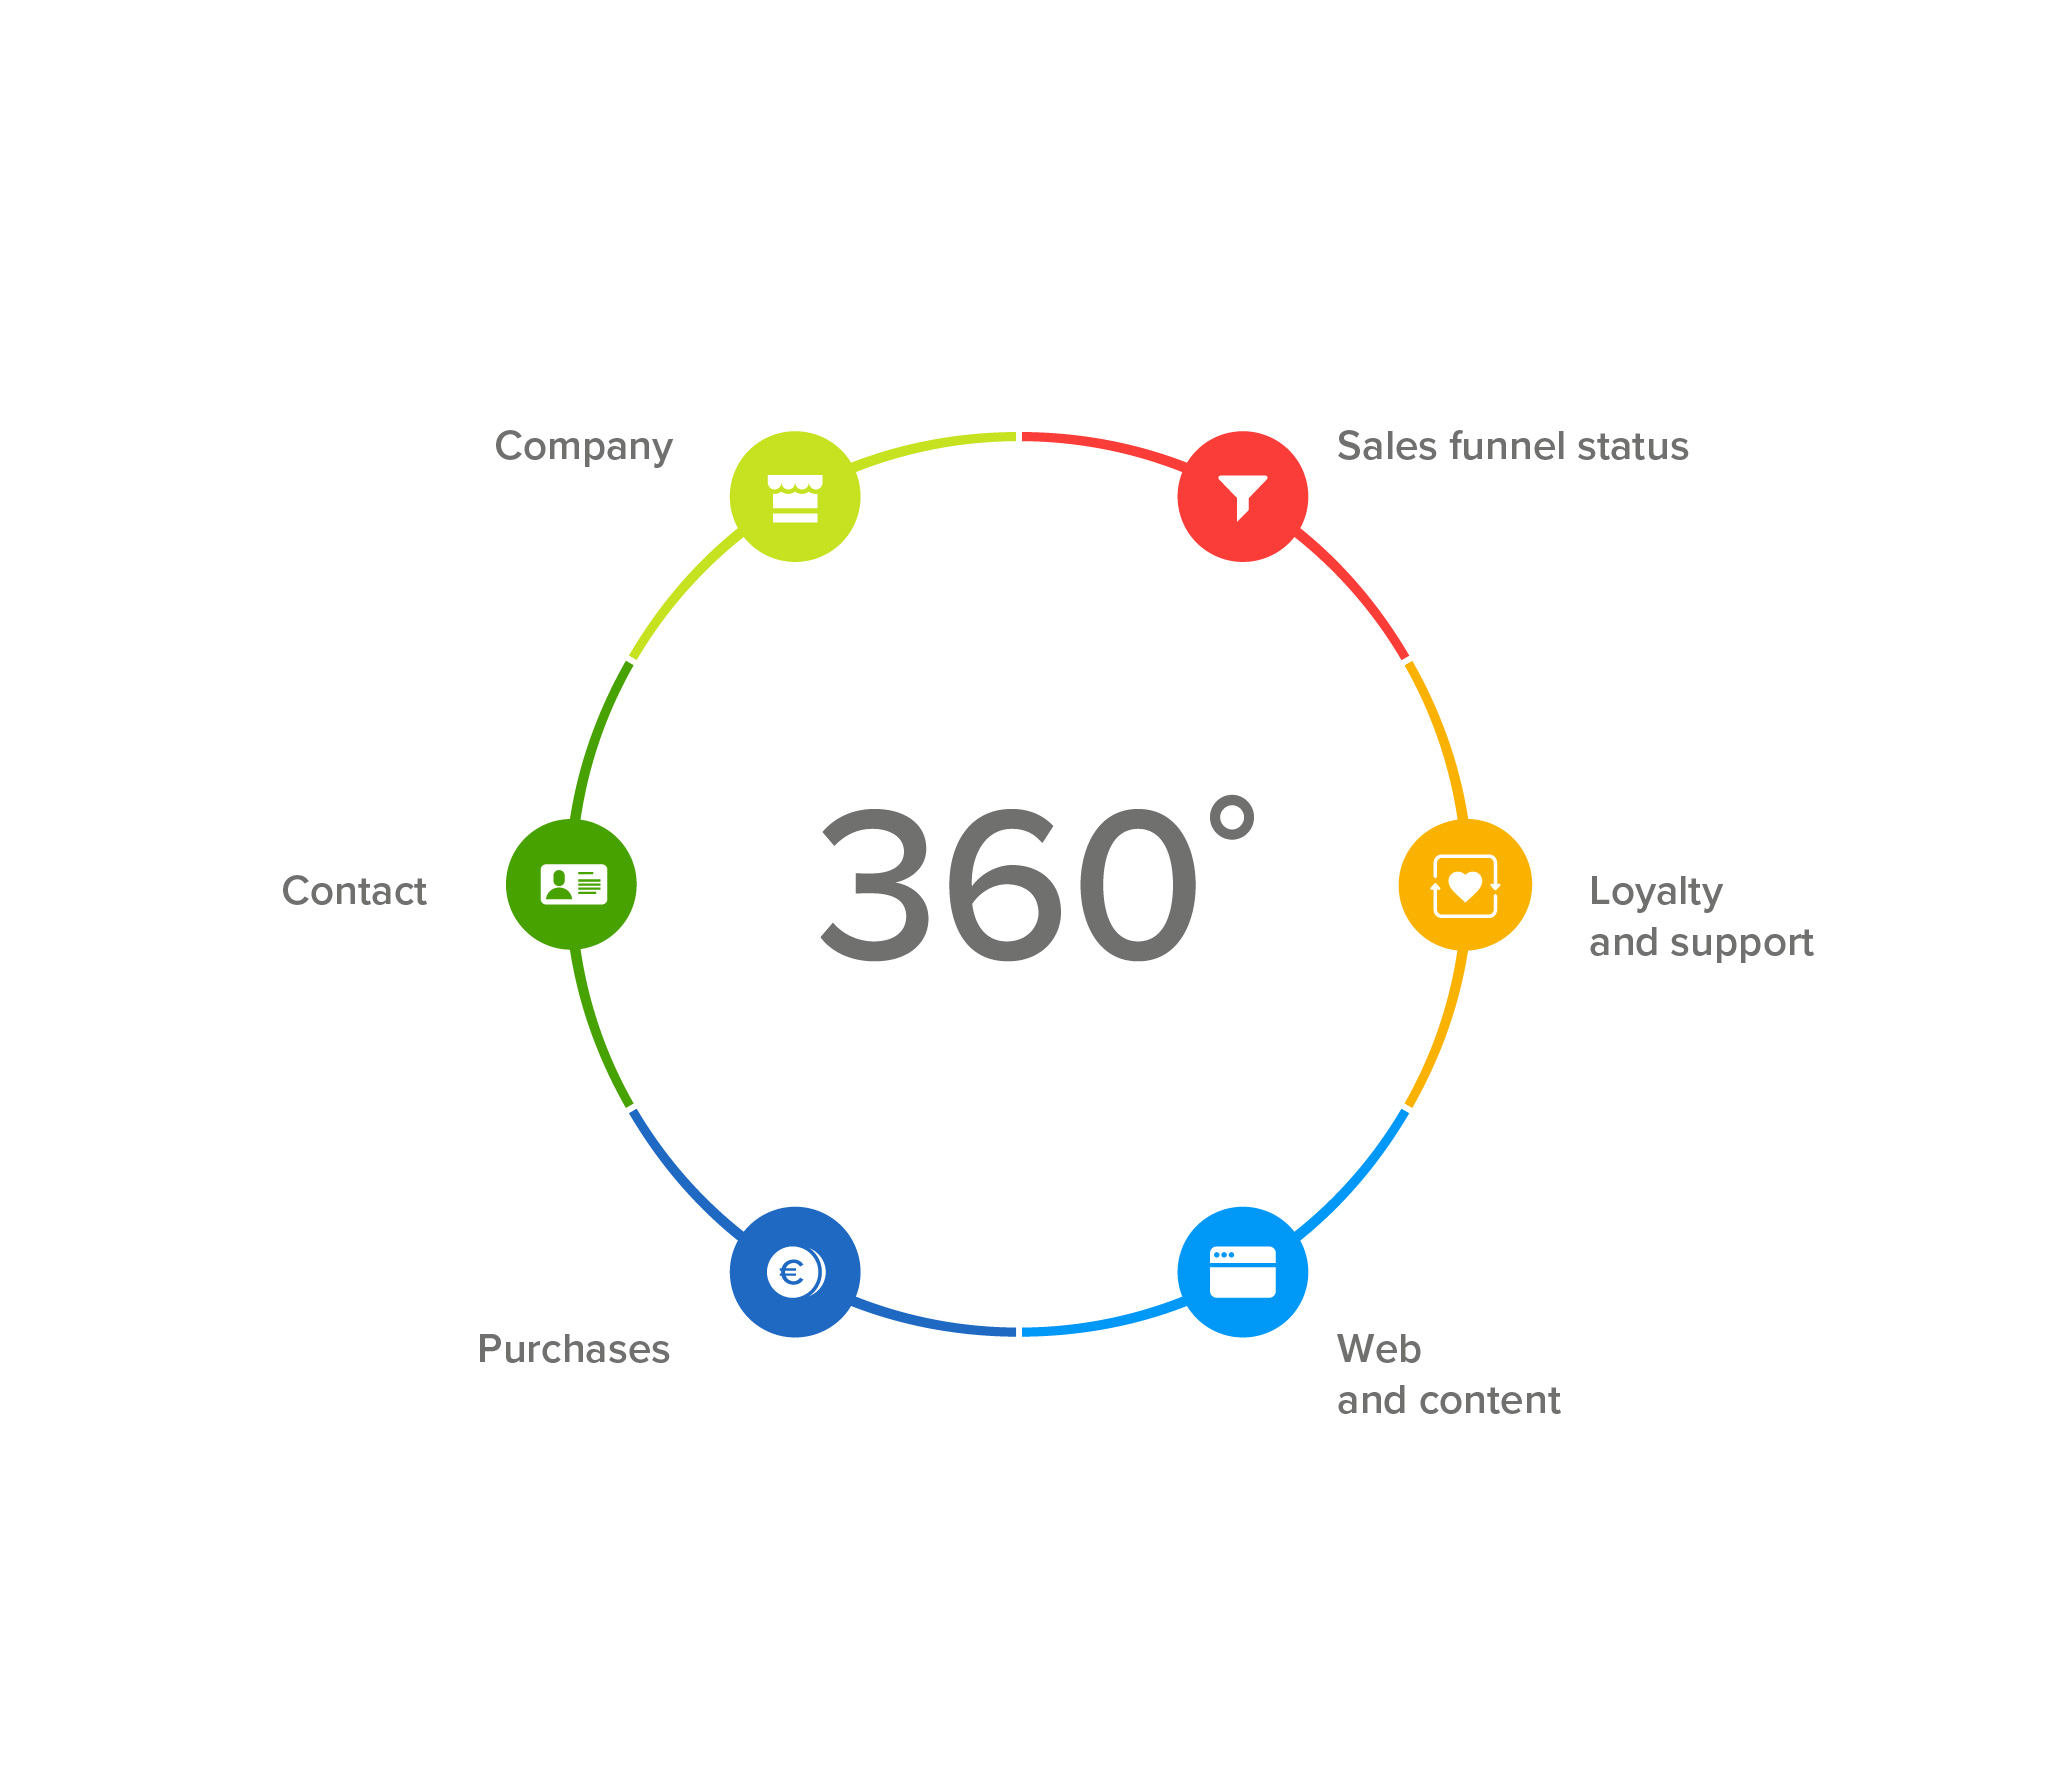 Significance of 360-degree Customer View